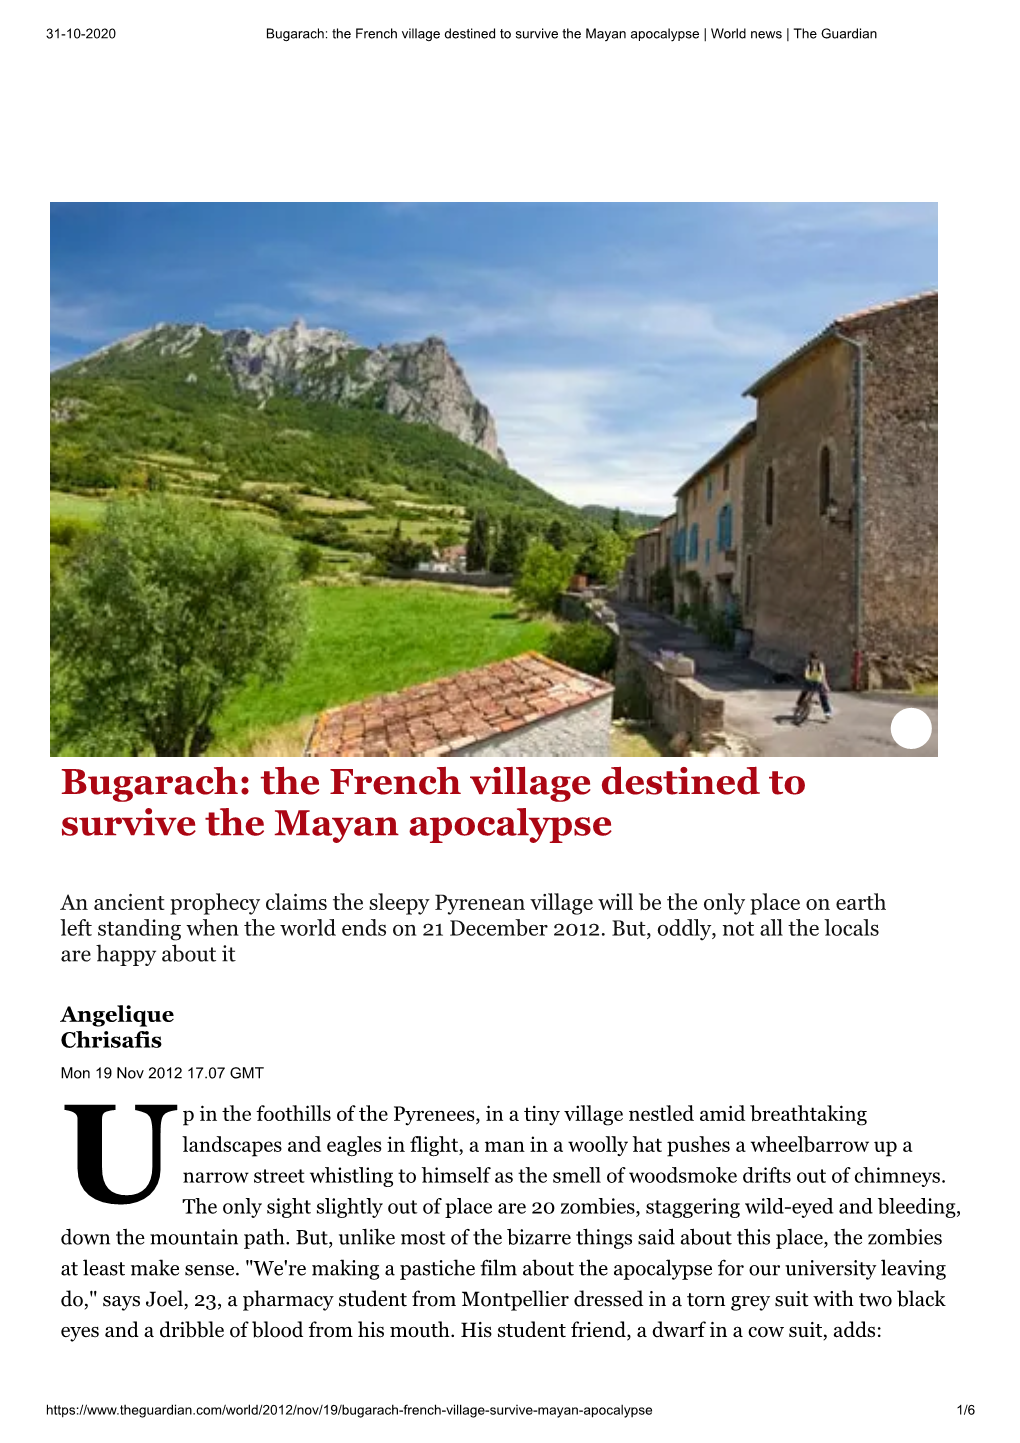 Bugarach: the French Village Destined to Survive the Mayan Apocalypse | World News | the Guardian